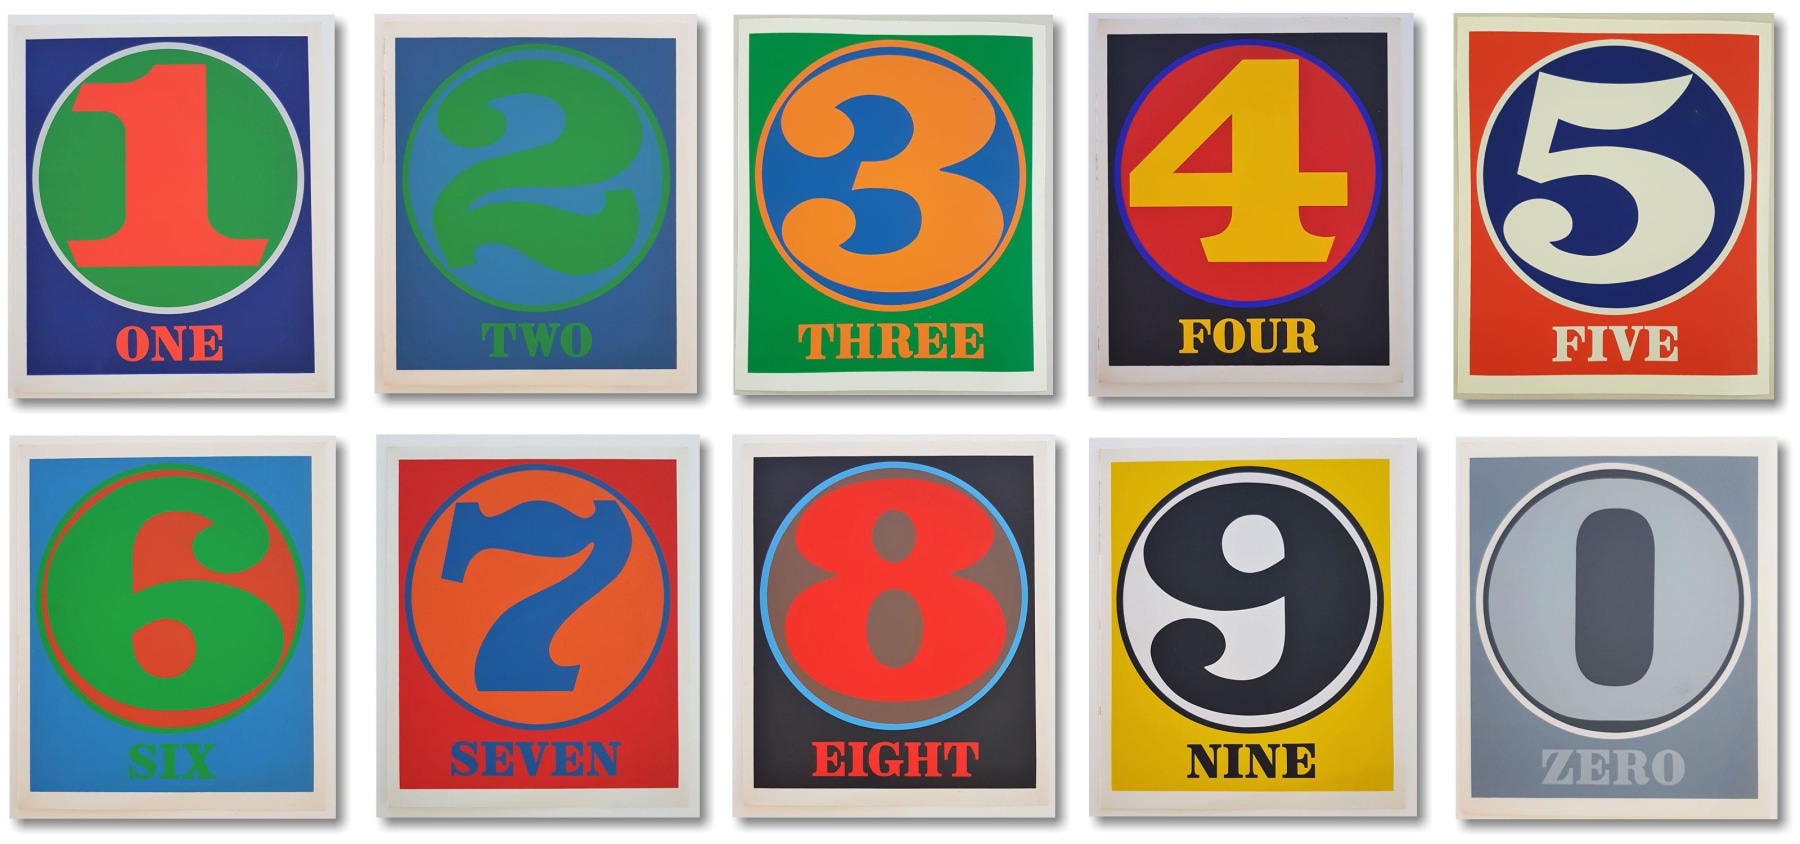 Ten serigraphs, each with a single numeral in circle, occupying the majority of the work, above the number spelled out. There are two horizontal rows of five serigraphs; the top row contains the prints of the numbers one through five, and the bottom row the numbers six through zero.